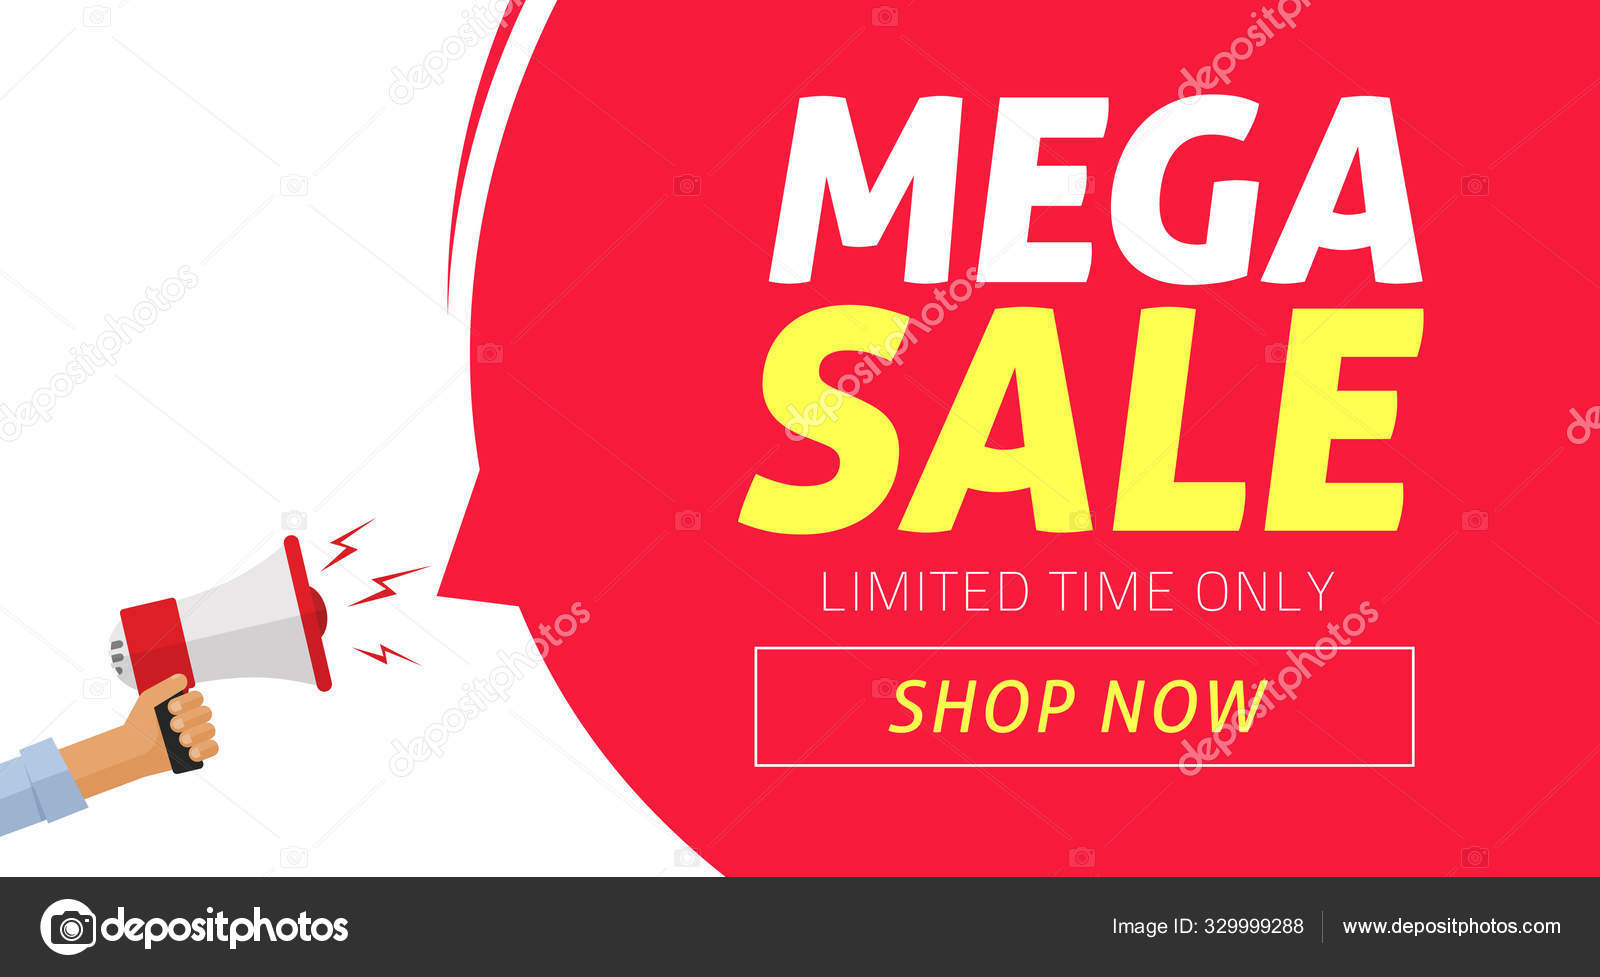 Mega sale banner design with limited time discount offer illustration, flat clearance promotion special deal off web banner with megaphone template or Stock Vector Image by ©vladwel #329999288